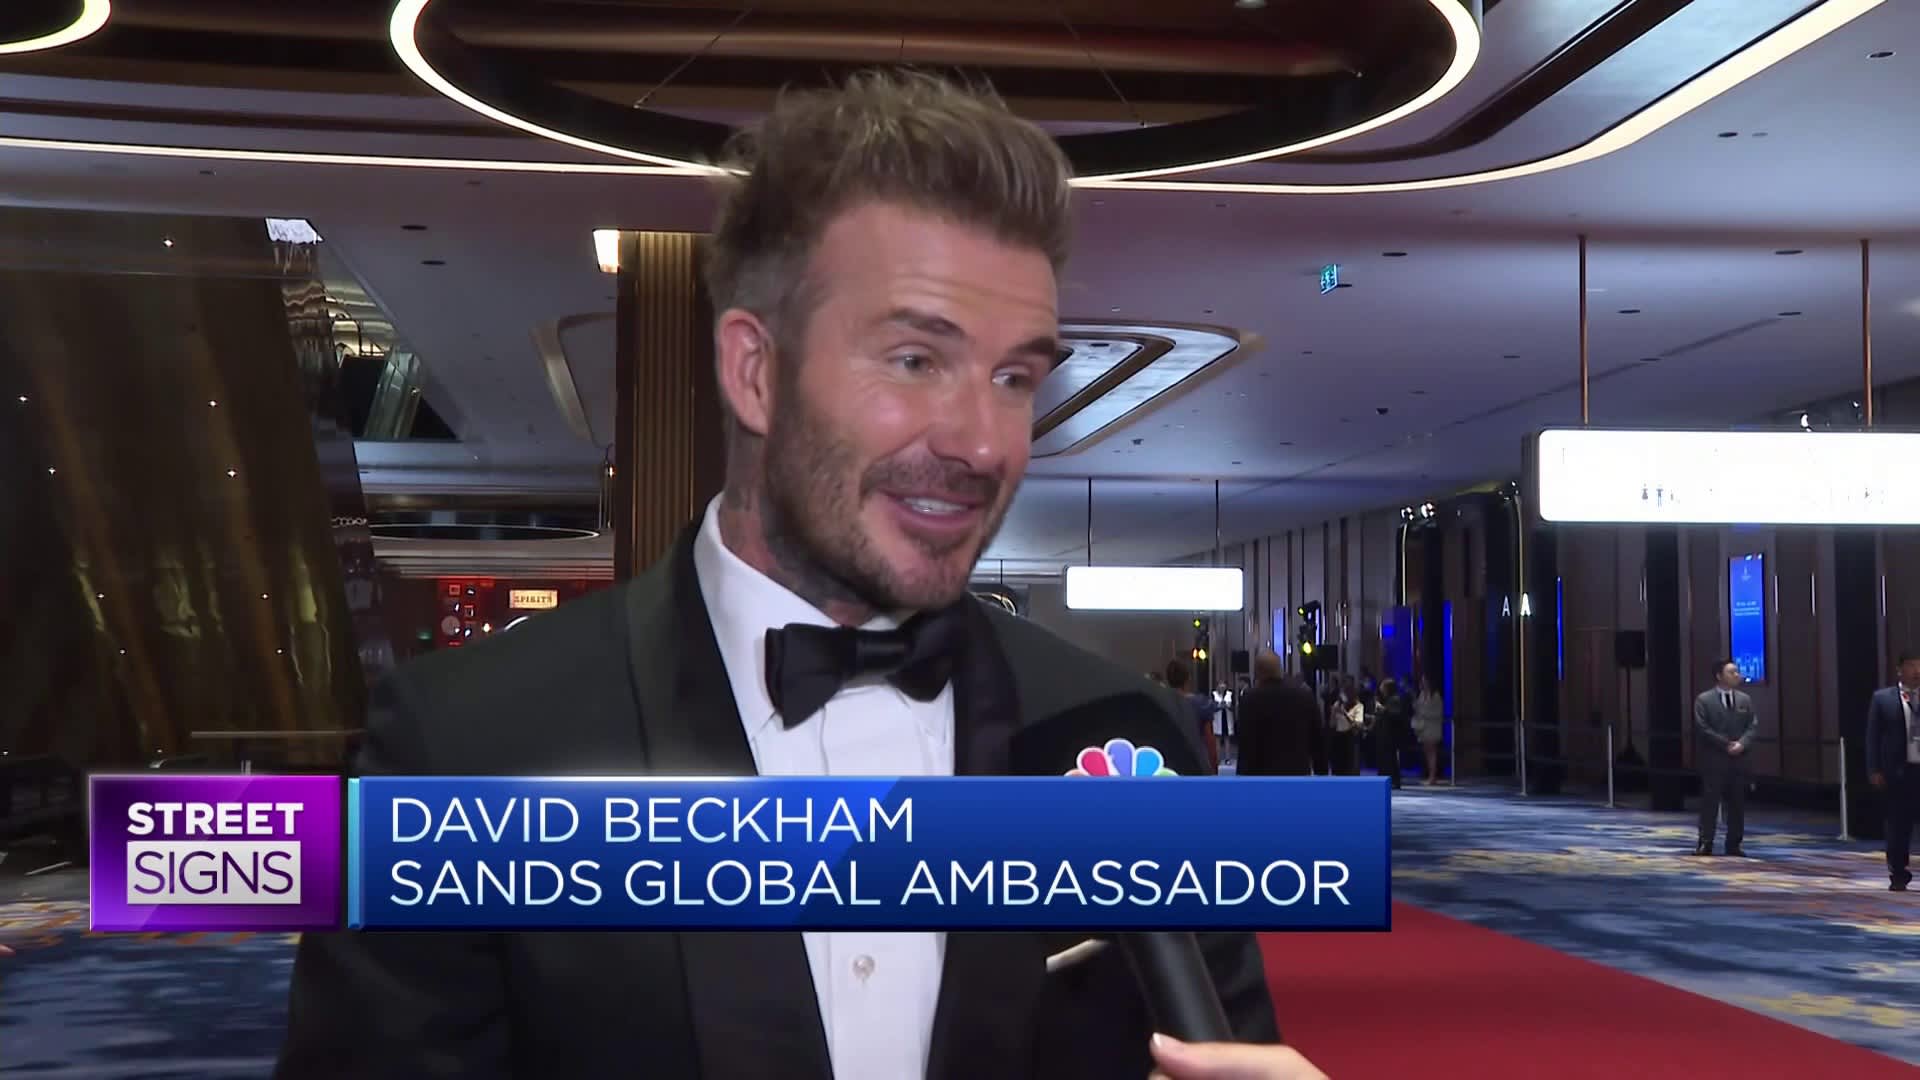 Home was my inspiration in designing The Londoner Macao suites, David Beckham says